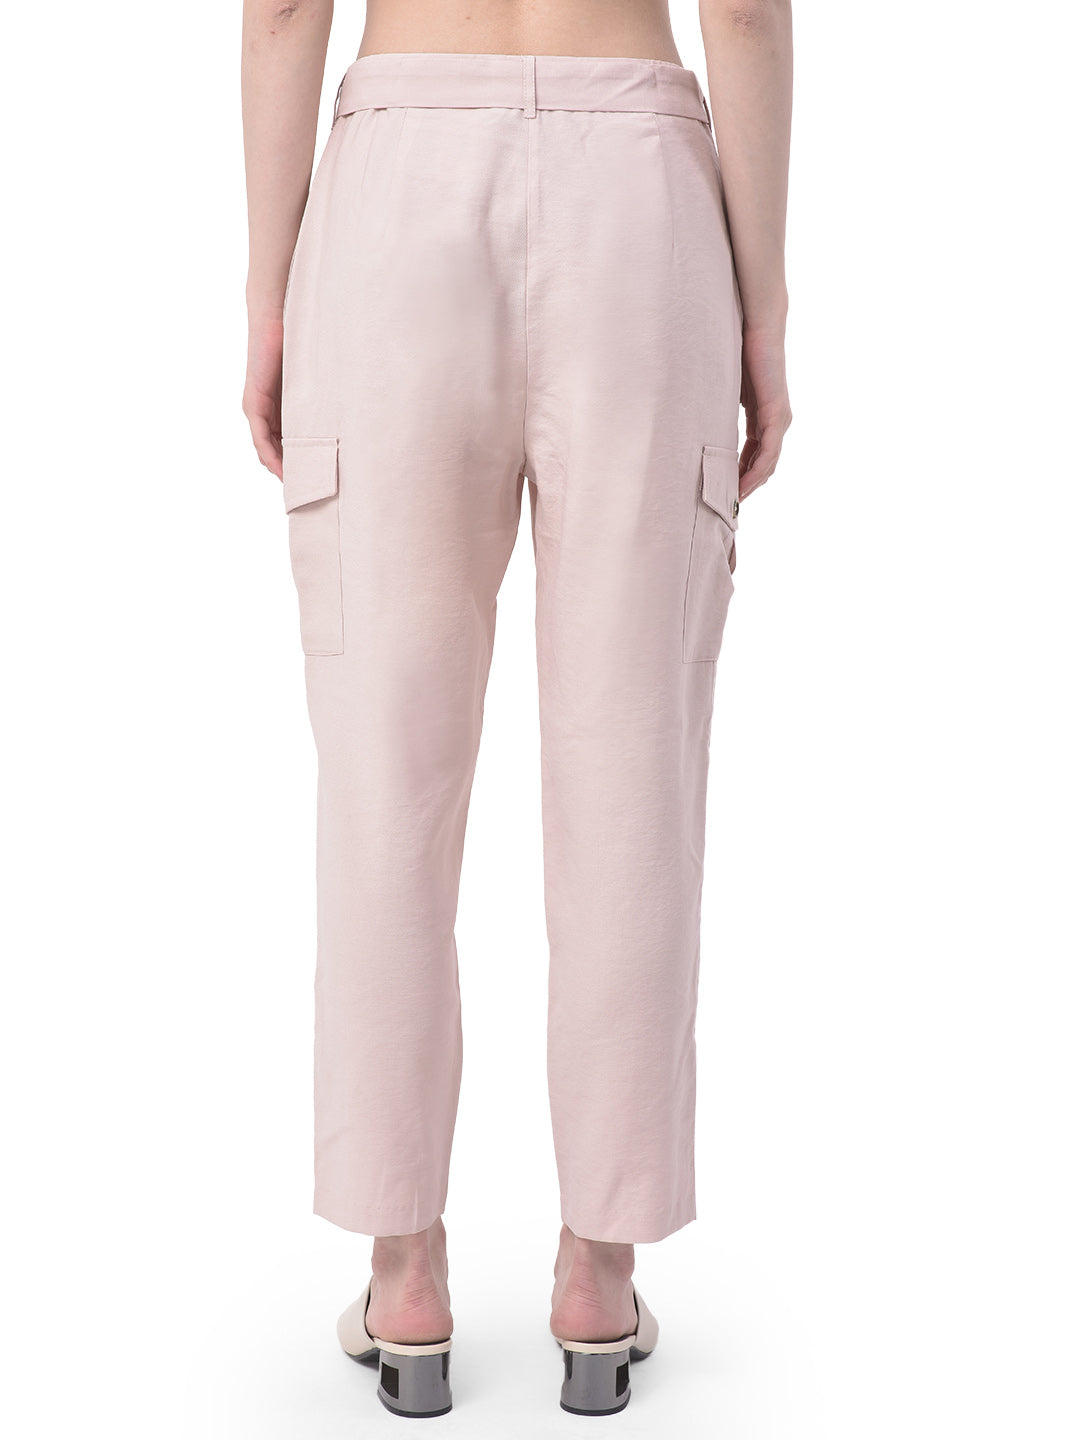 Beige Straight Pant With Pokcet